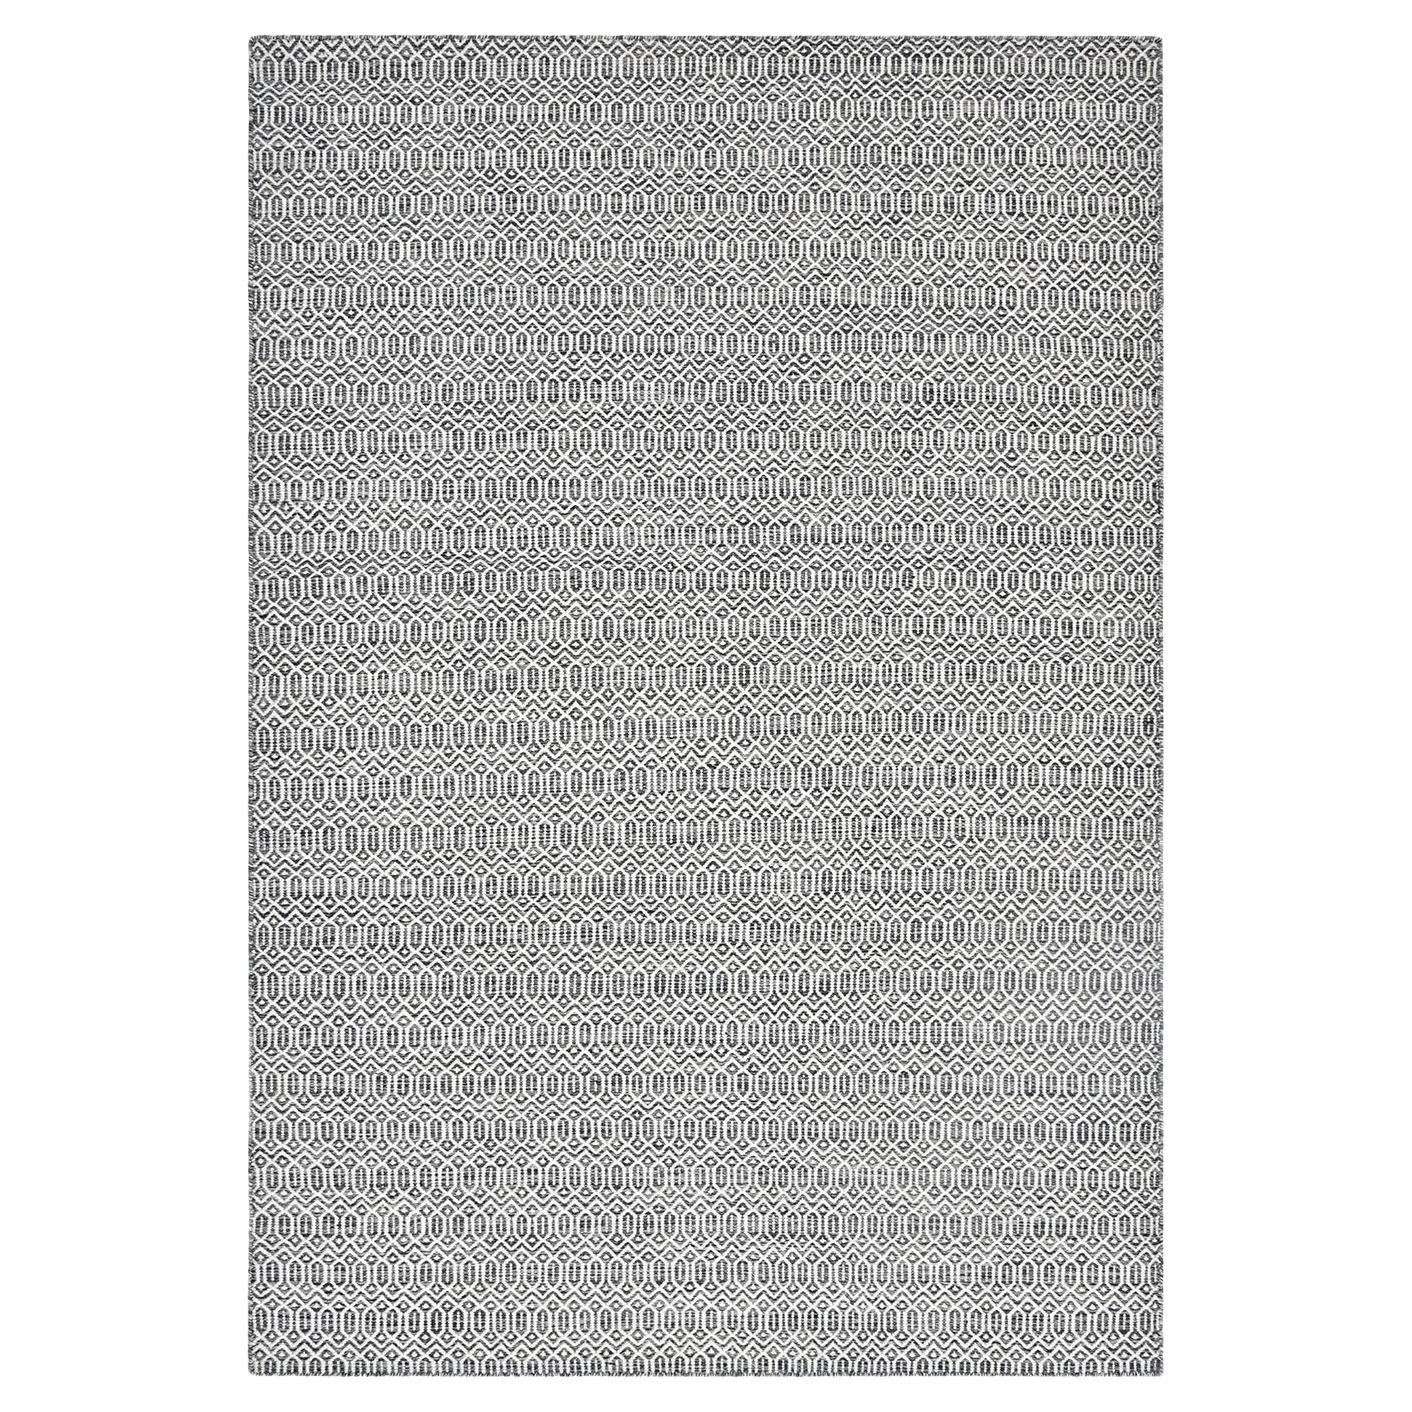 Solo Rugs Flatweave Geometric Hand Woven Gray Area Rug For Sale